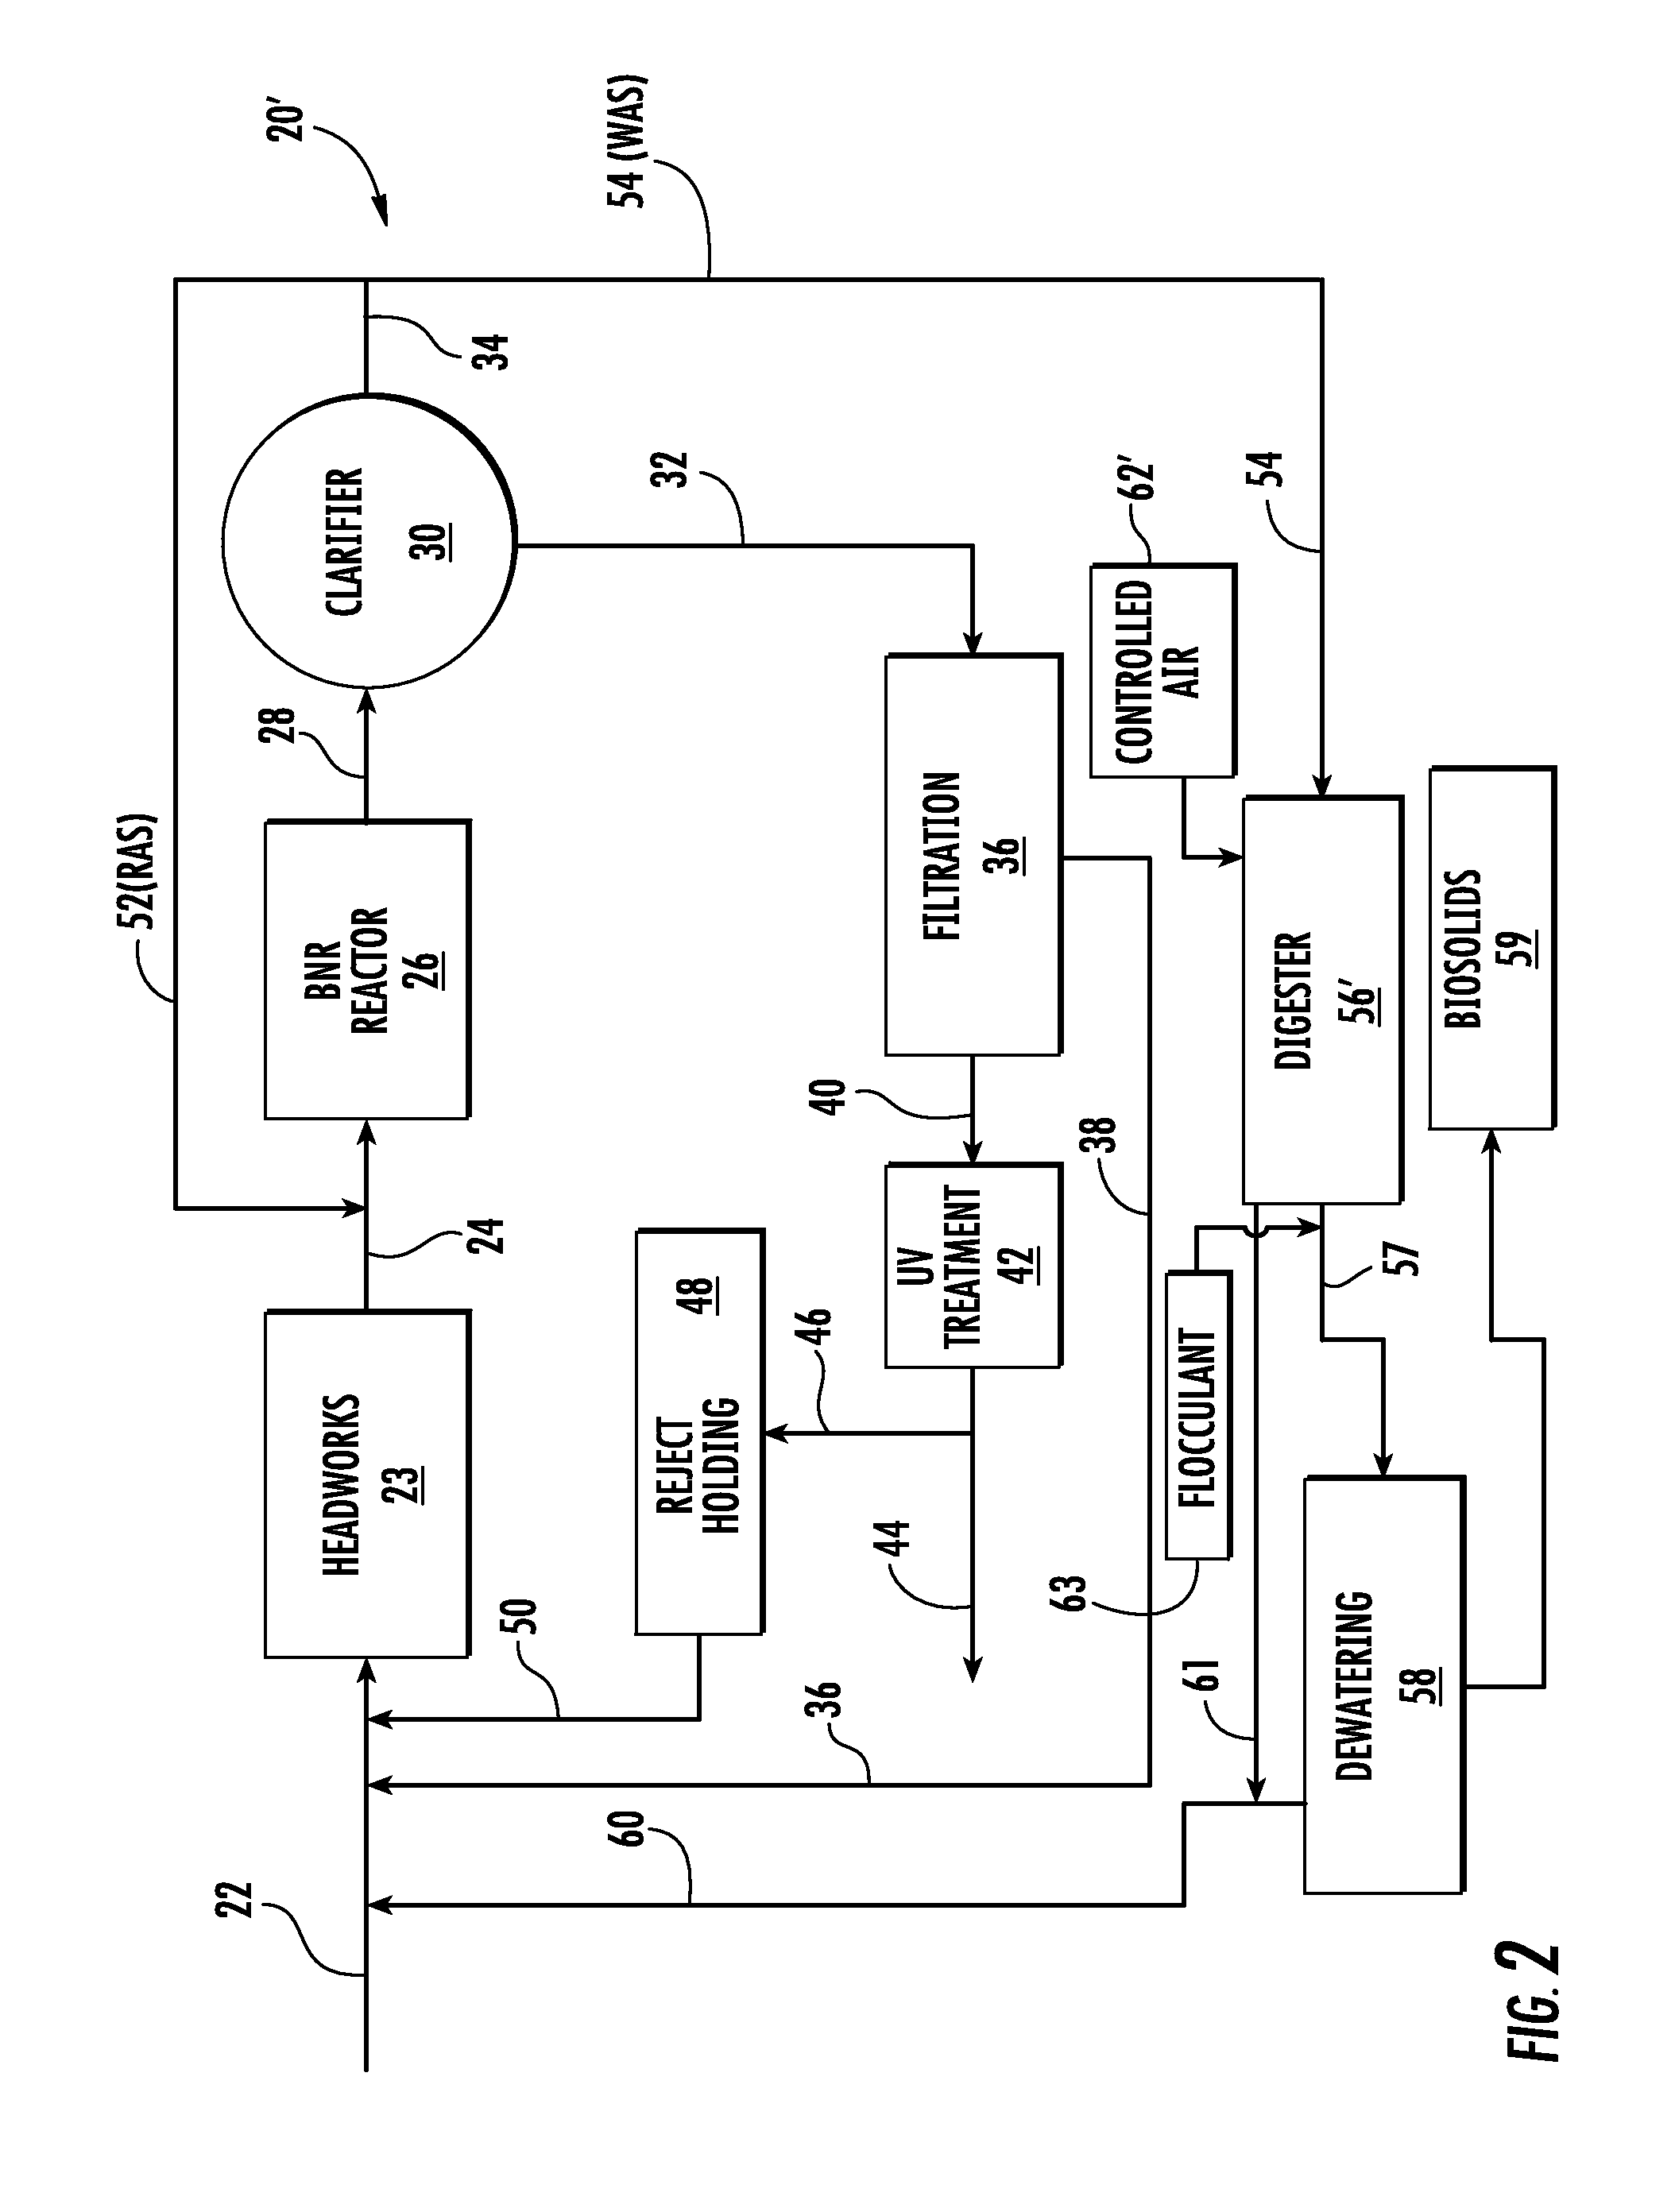 Systems and Methods for Enhanced Facultative Biosolids Stabilization